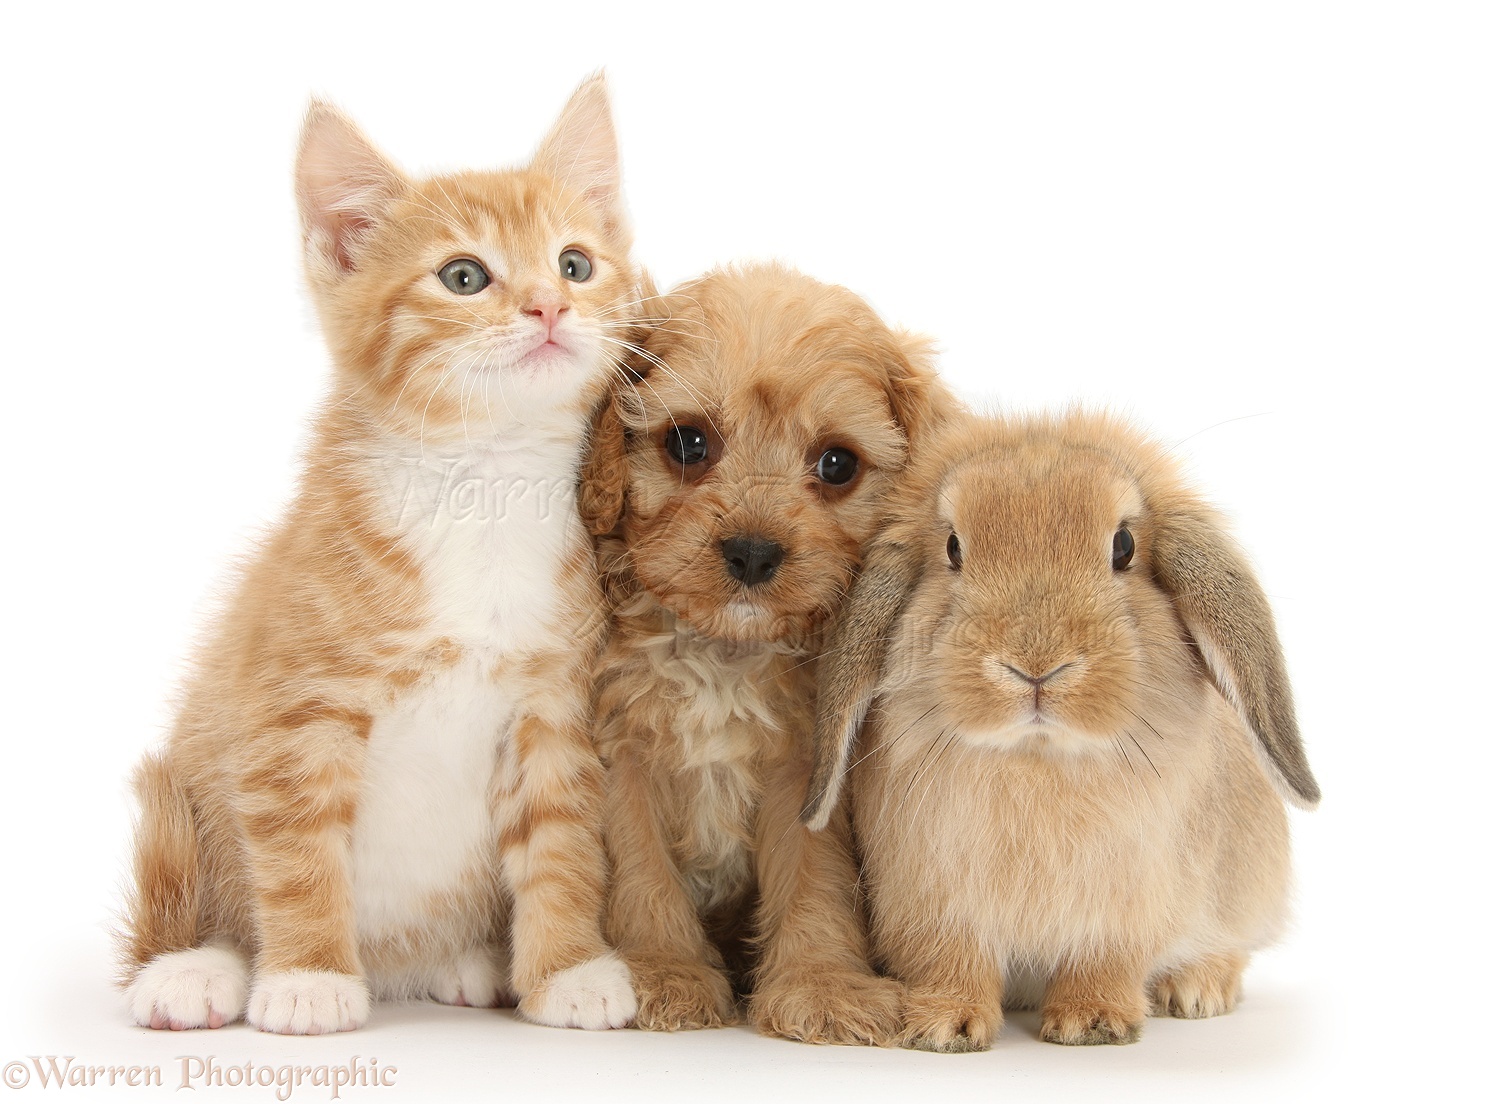 26737-Ginger-kitten-with-Cavapoo-pup-and-Lop-rabbit-white-background.jpg